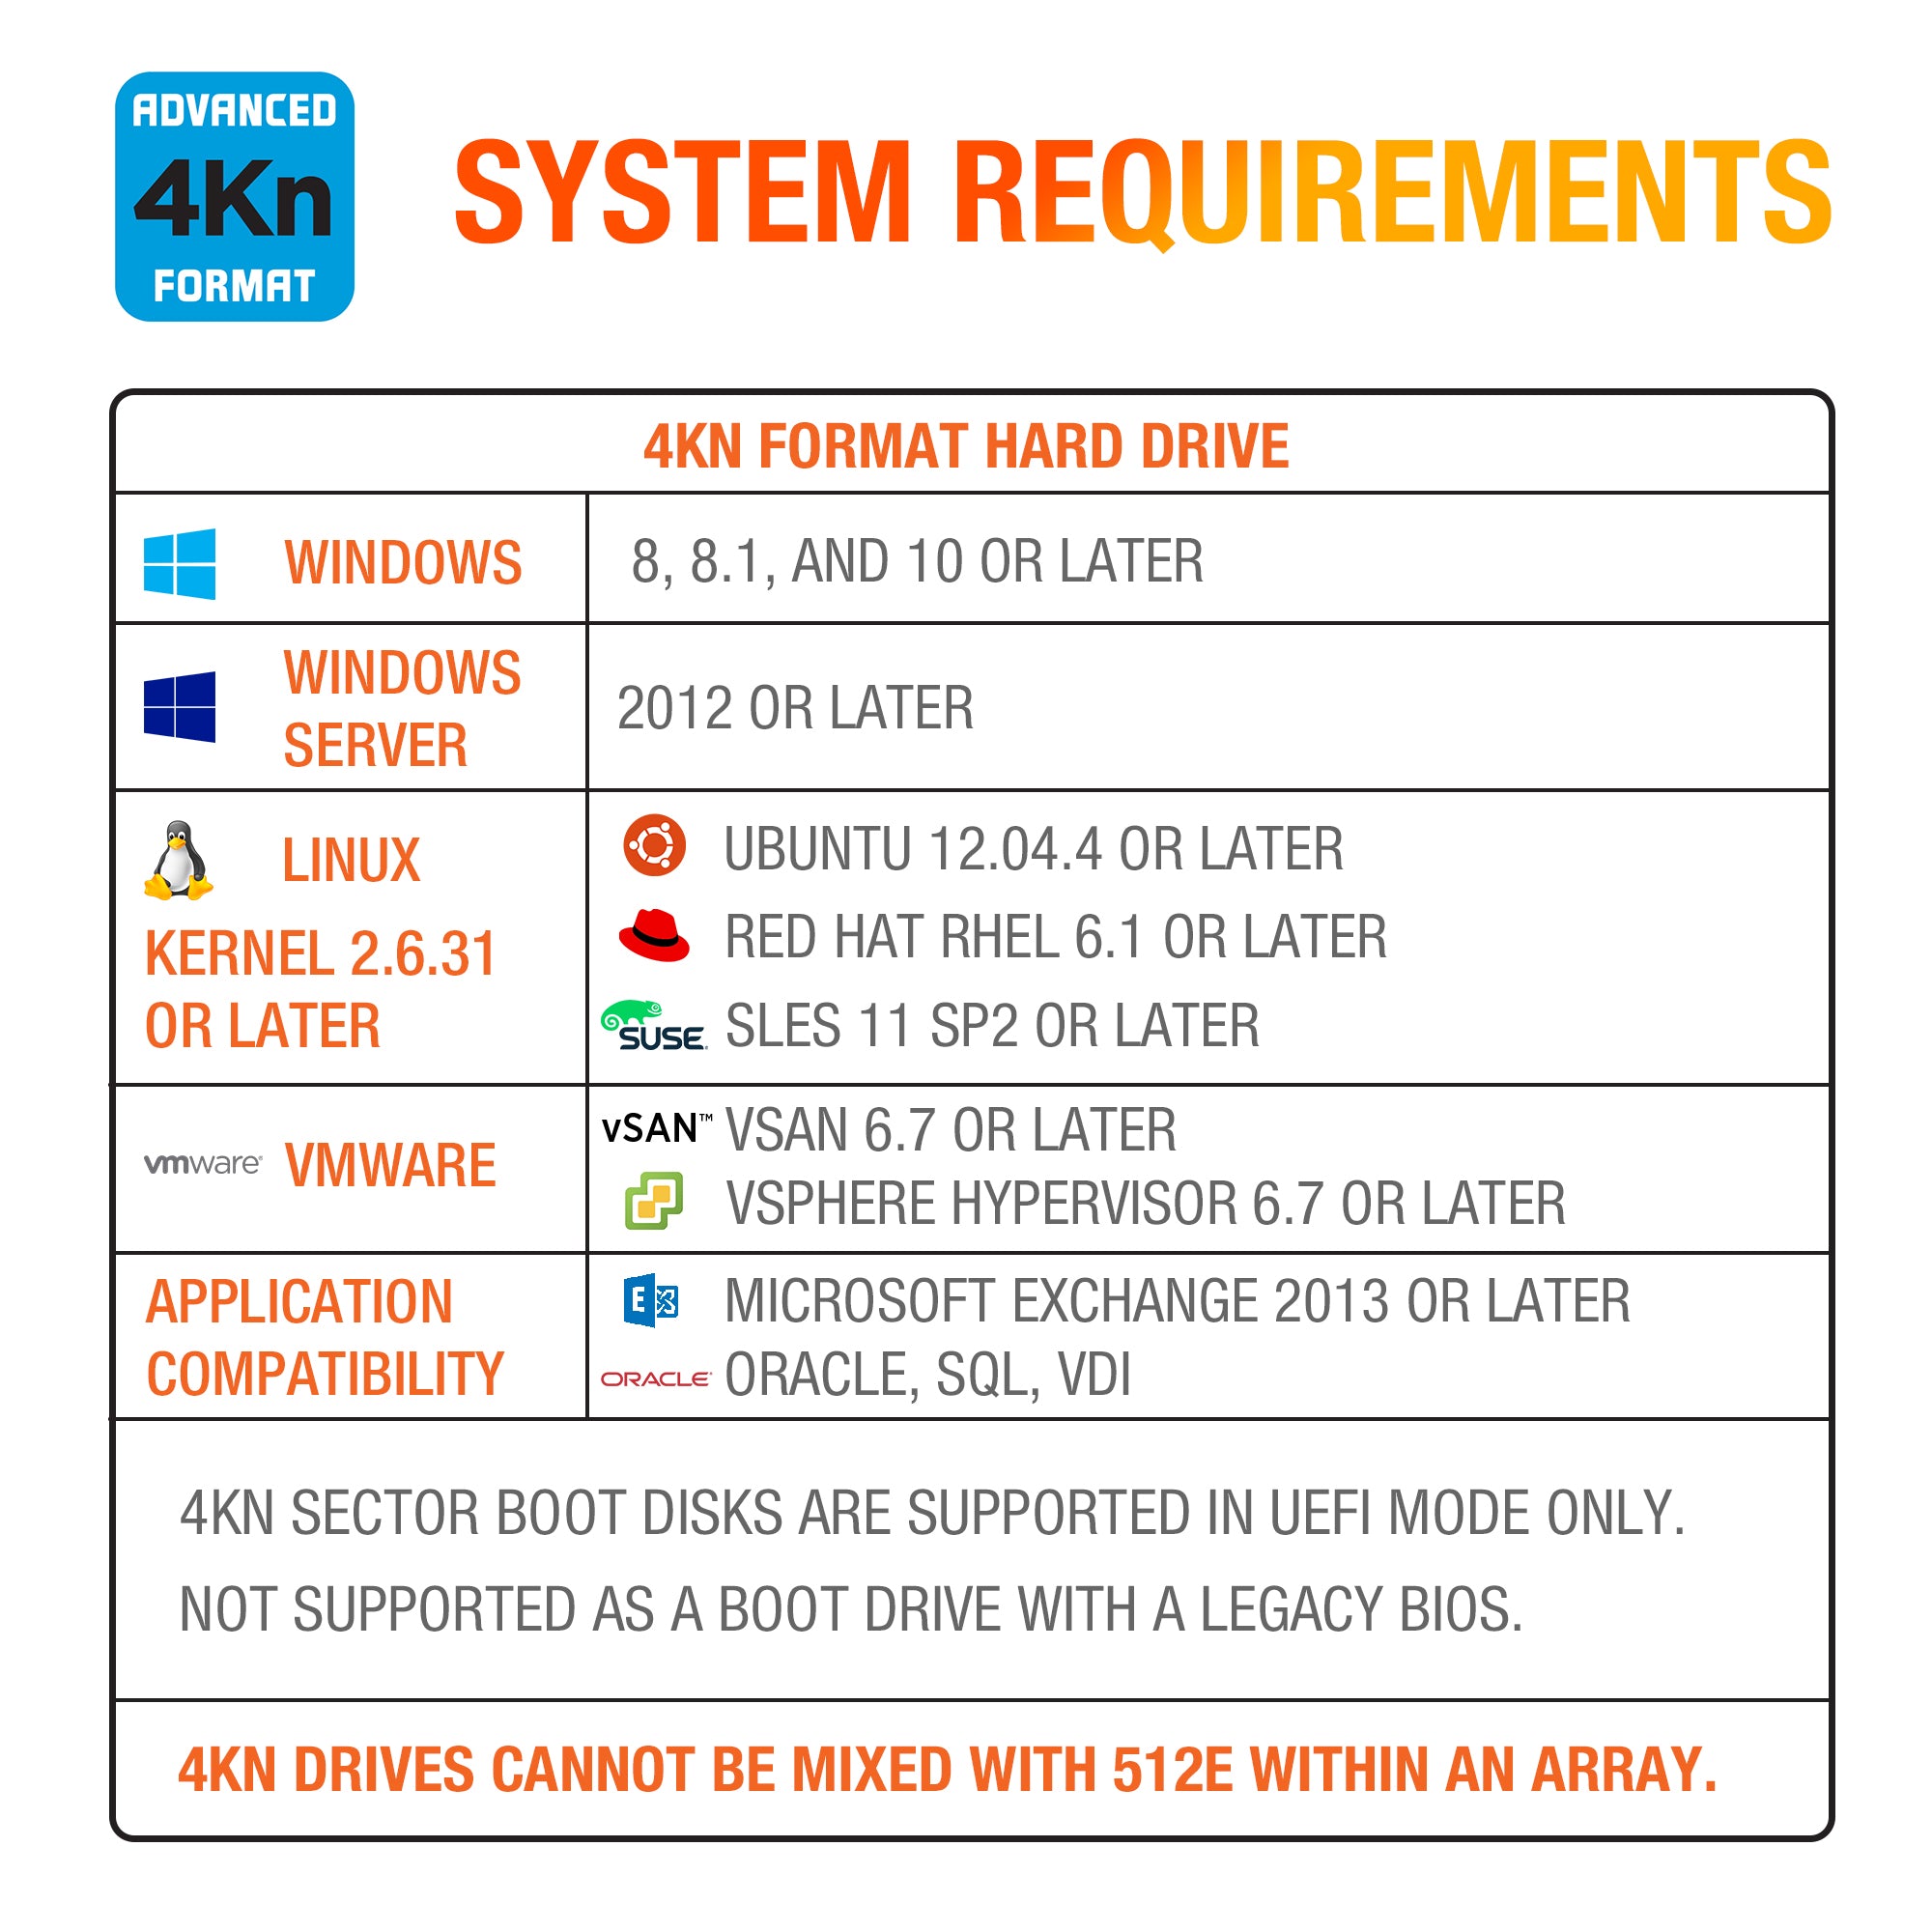 4Kn System Requirements